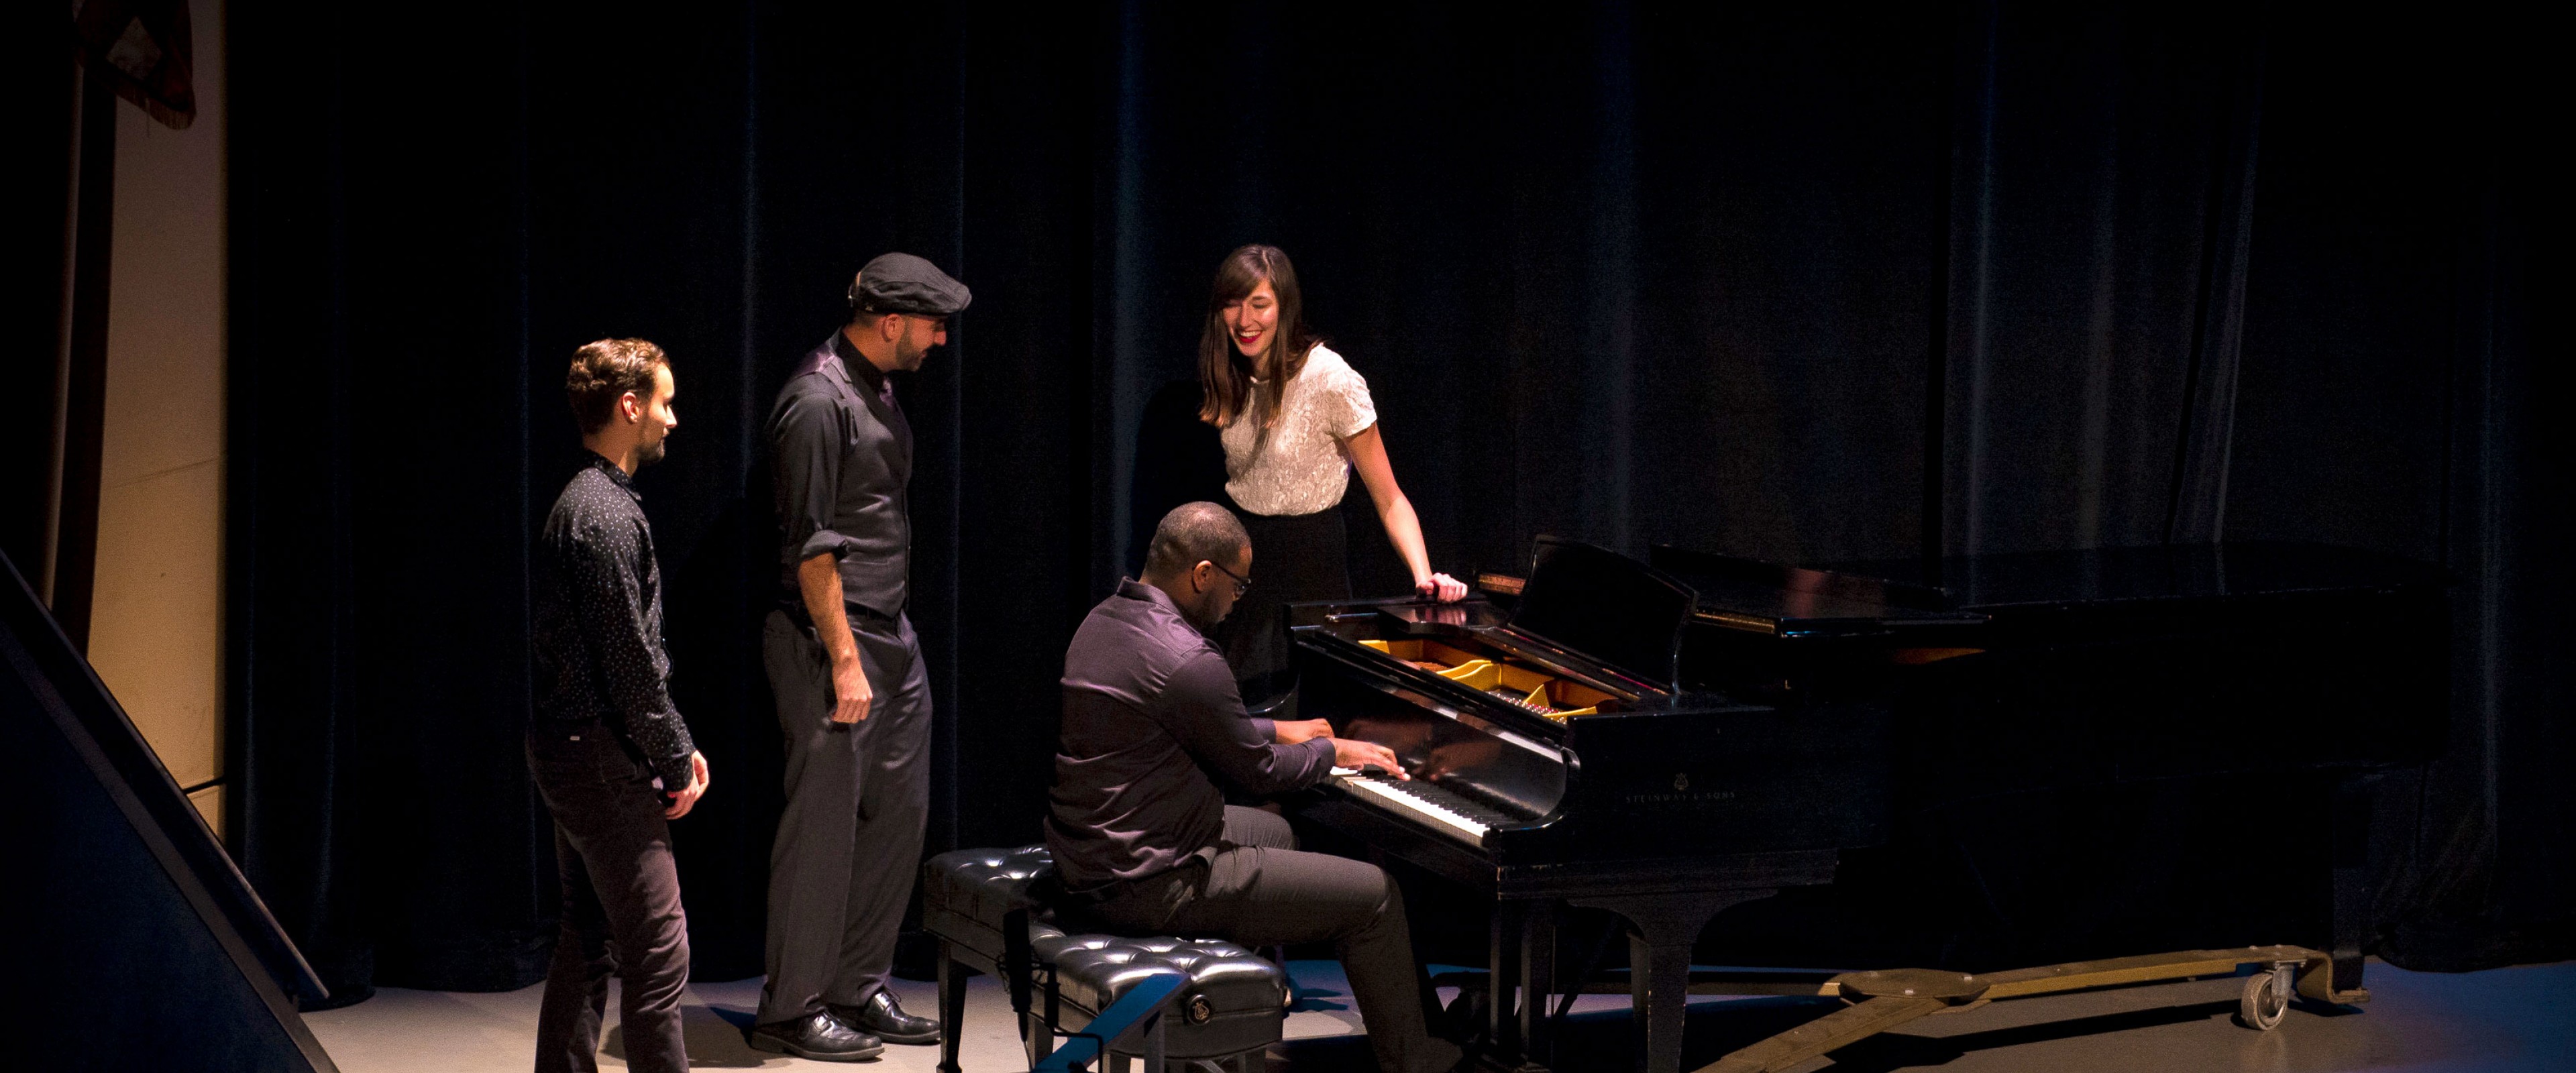 Group of four jazz students performing on stage, singing and playing piano.